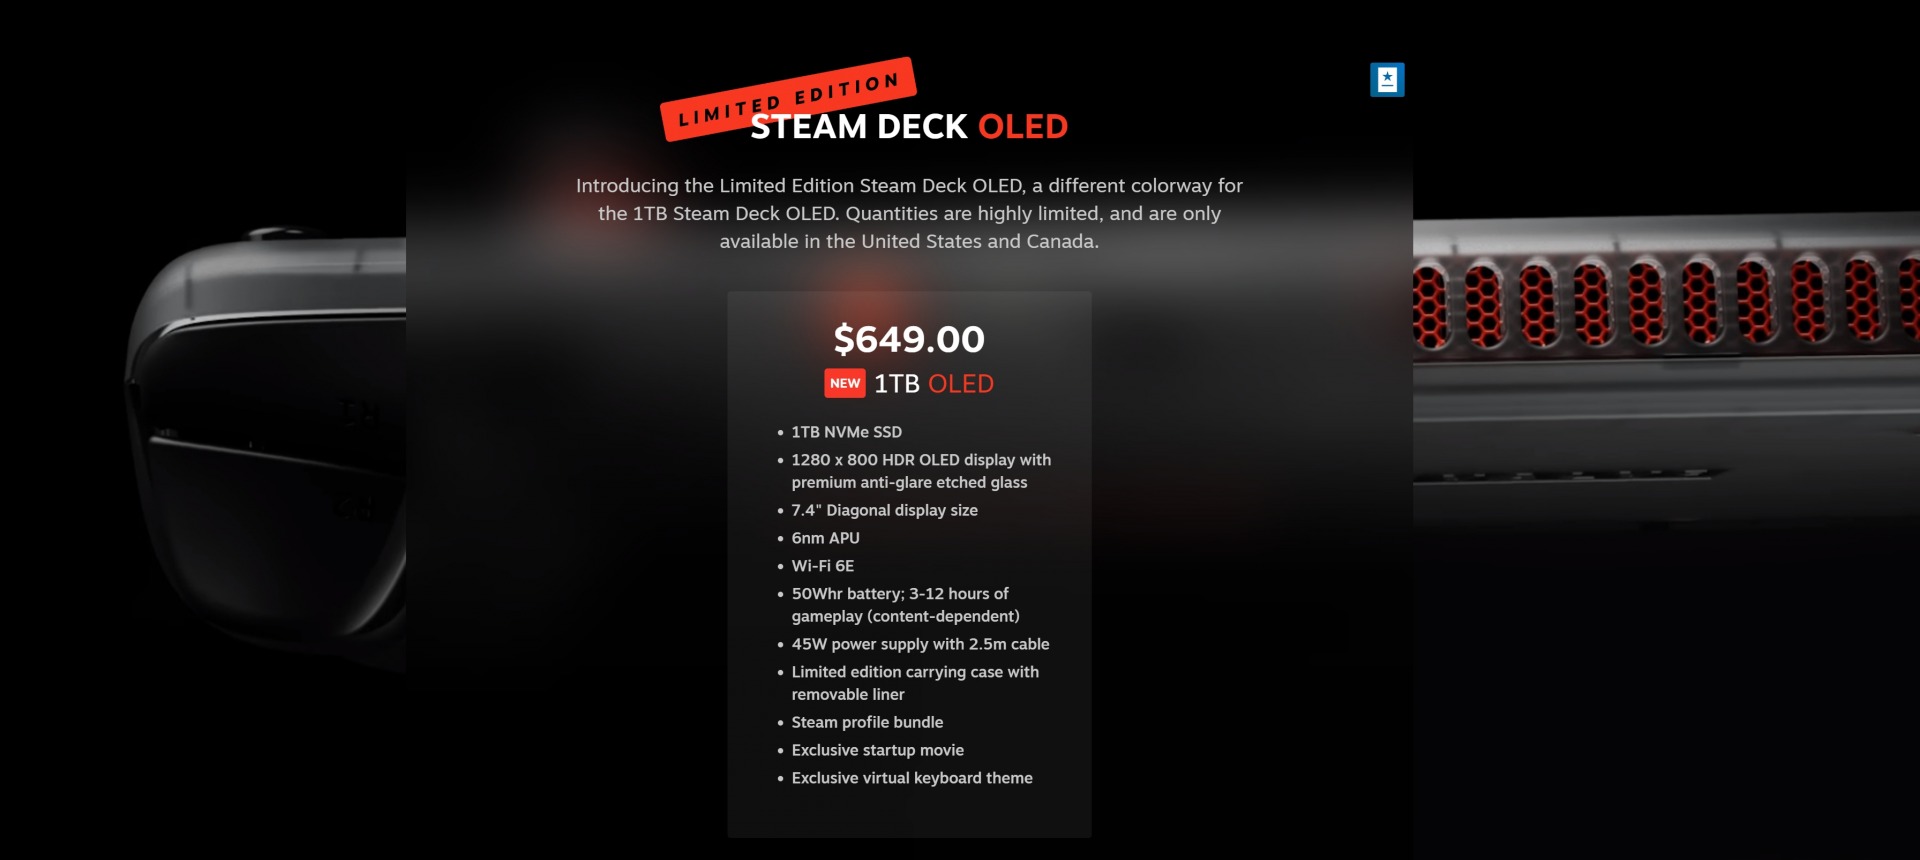 Introducing Steam Deck OLED - Now Available 